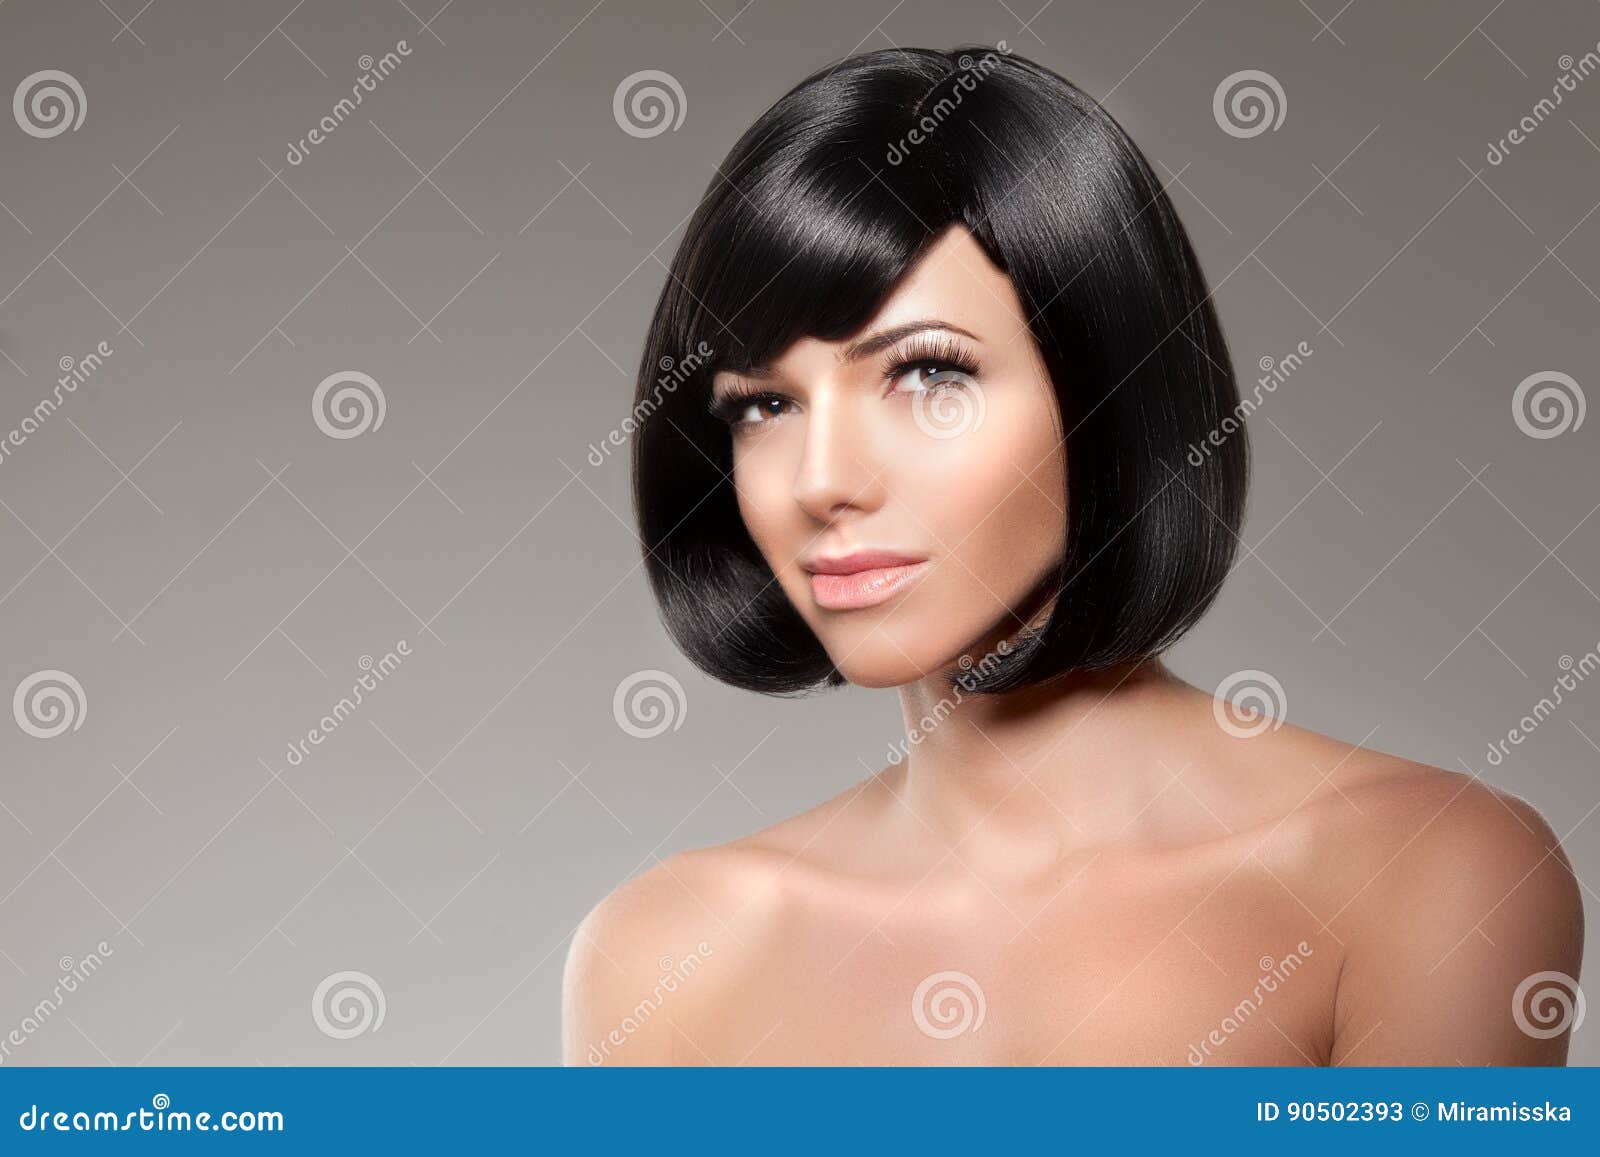 Stylish Woman with a Bob Hairstyle. Girl Model with a Short Black Fringe  and Vlosami Stock Image - Image of beauty, caucasian: 90502393